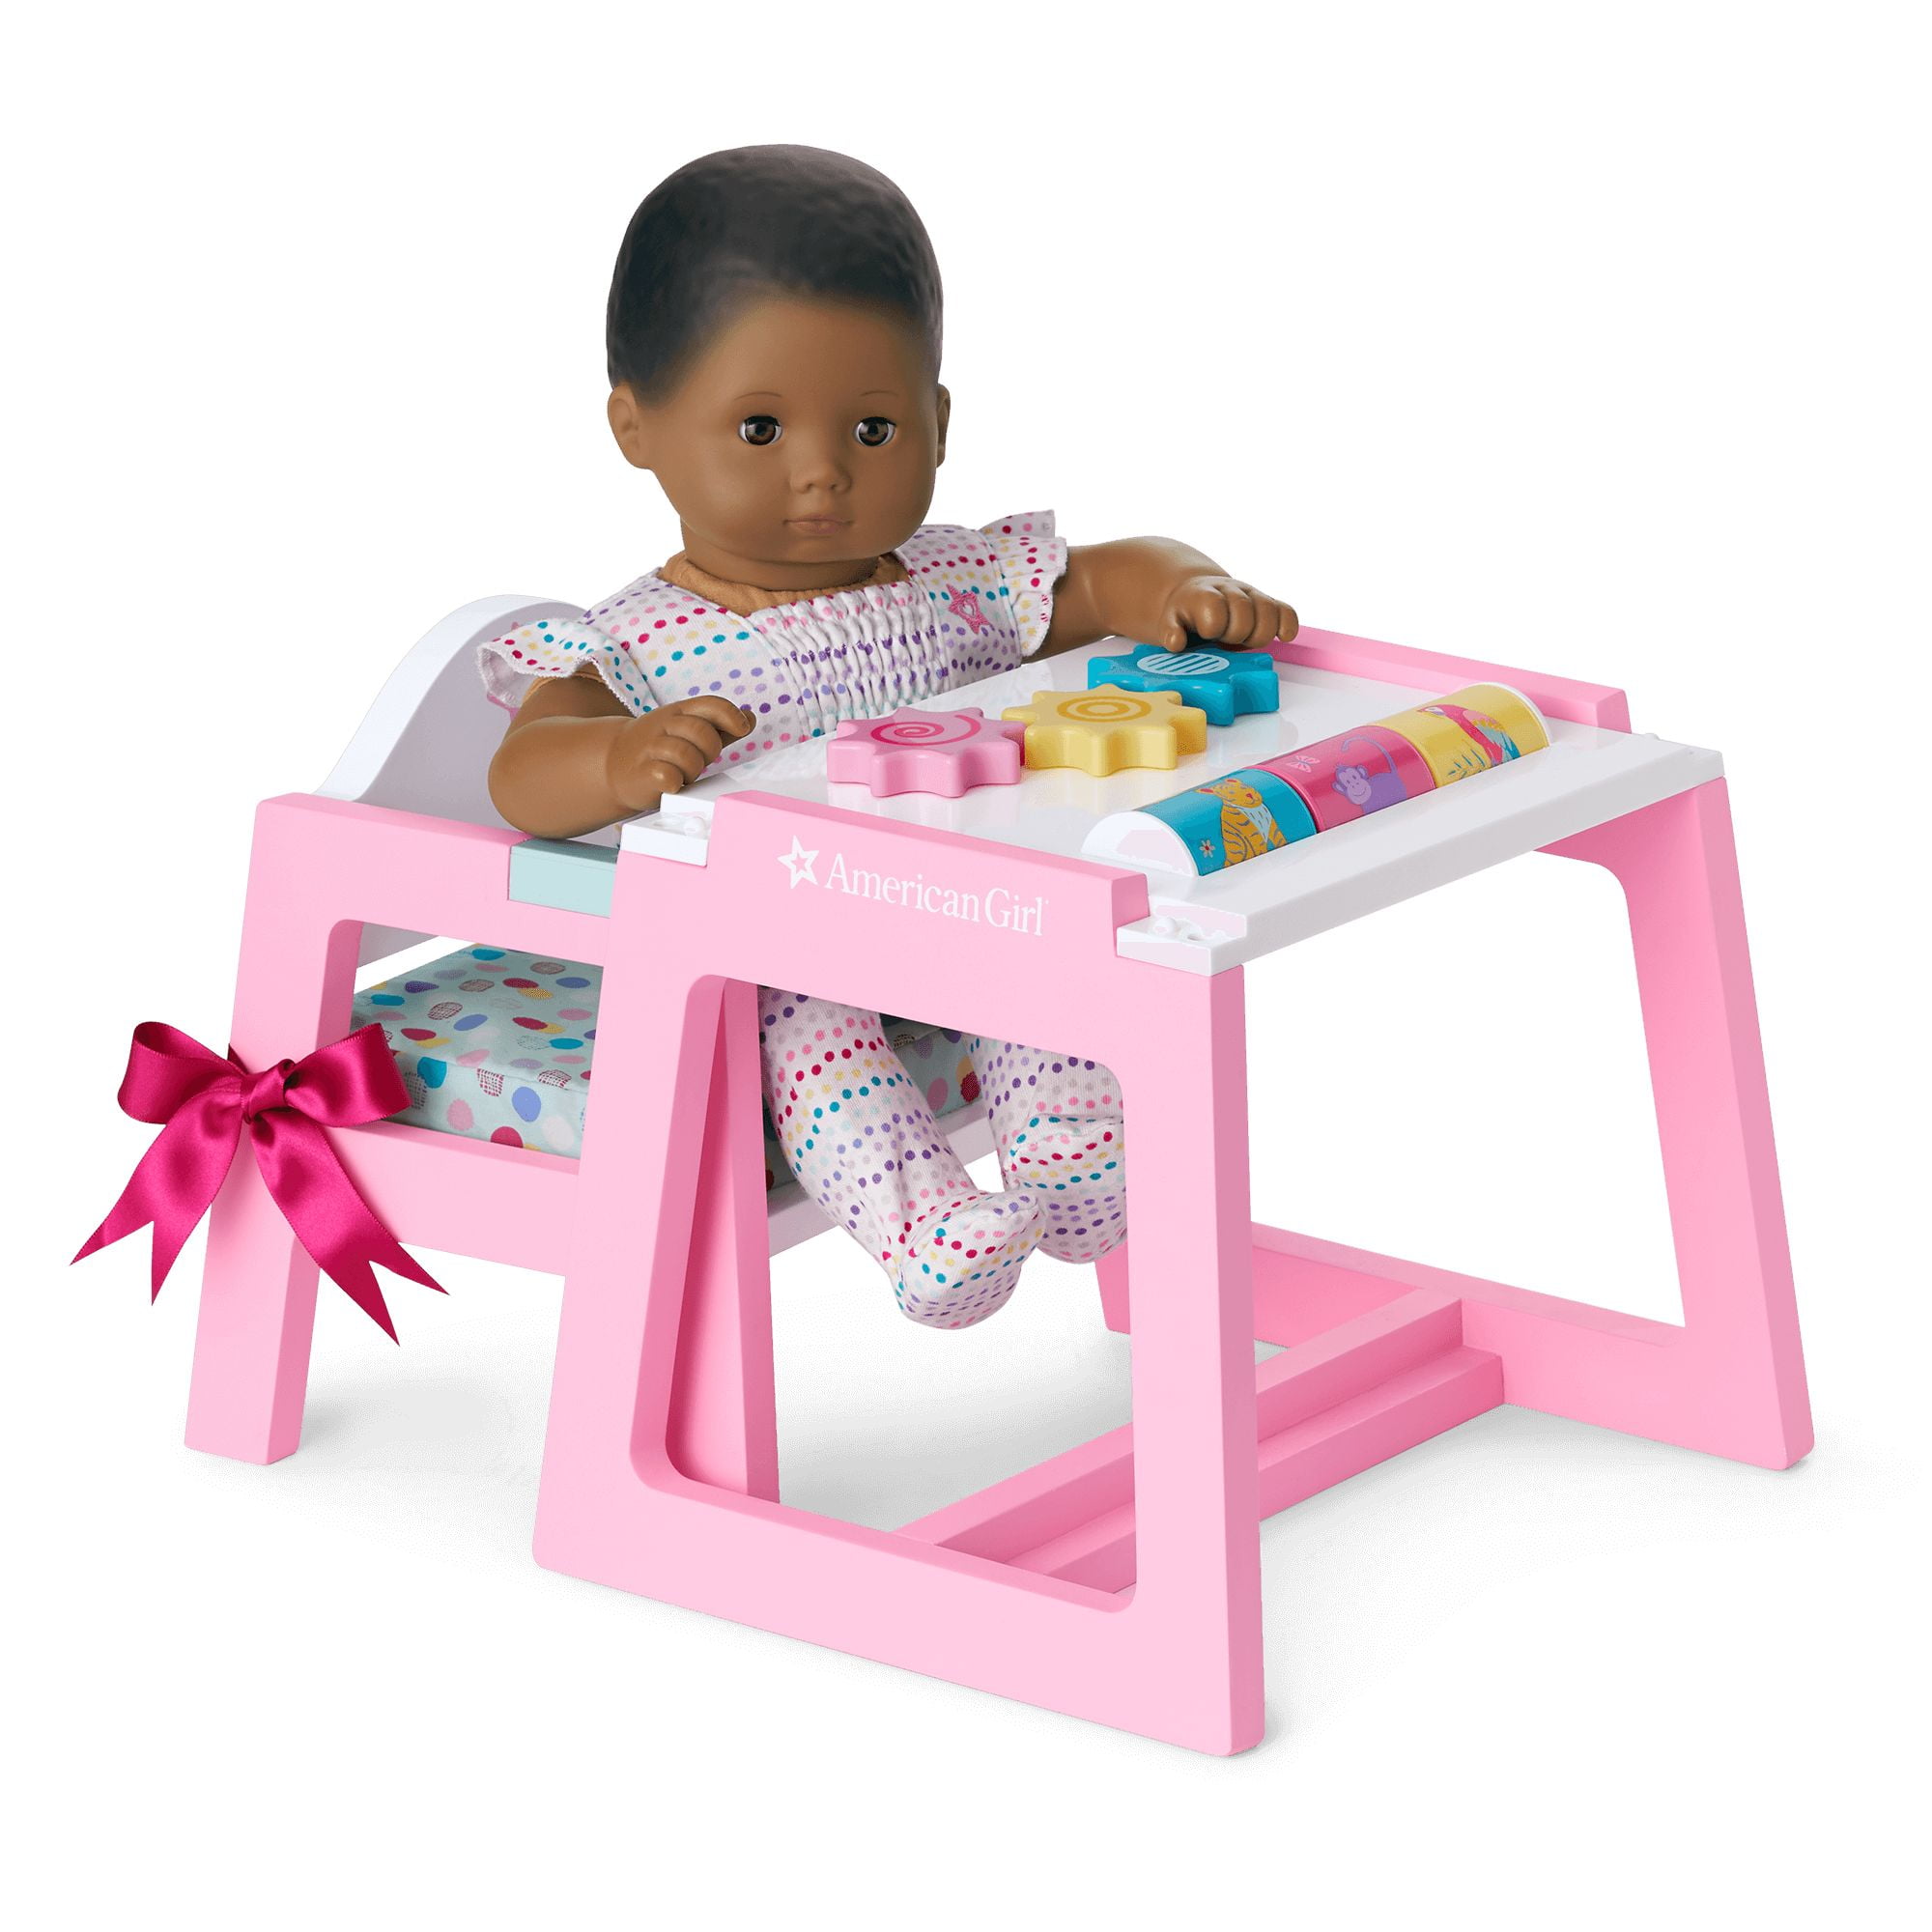 American Girl Bitty Baby Convertible High Chair Table For 15 Dolls Doll Not Included Walmartcom Walmartcom